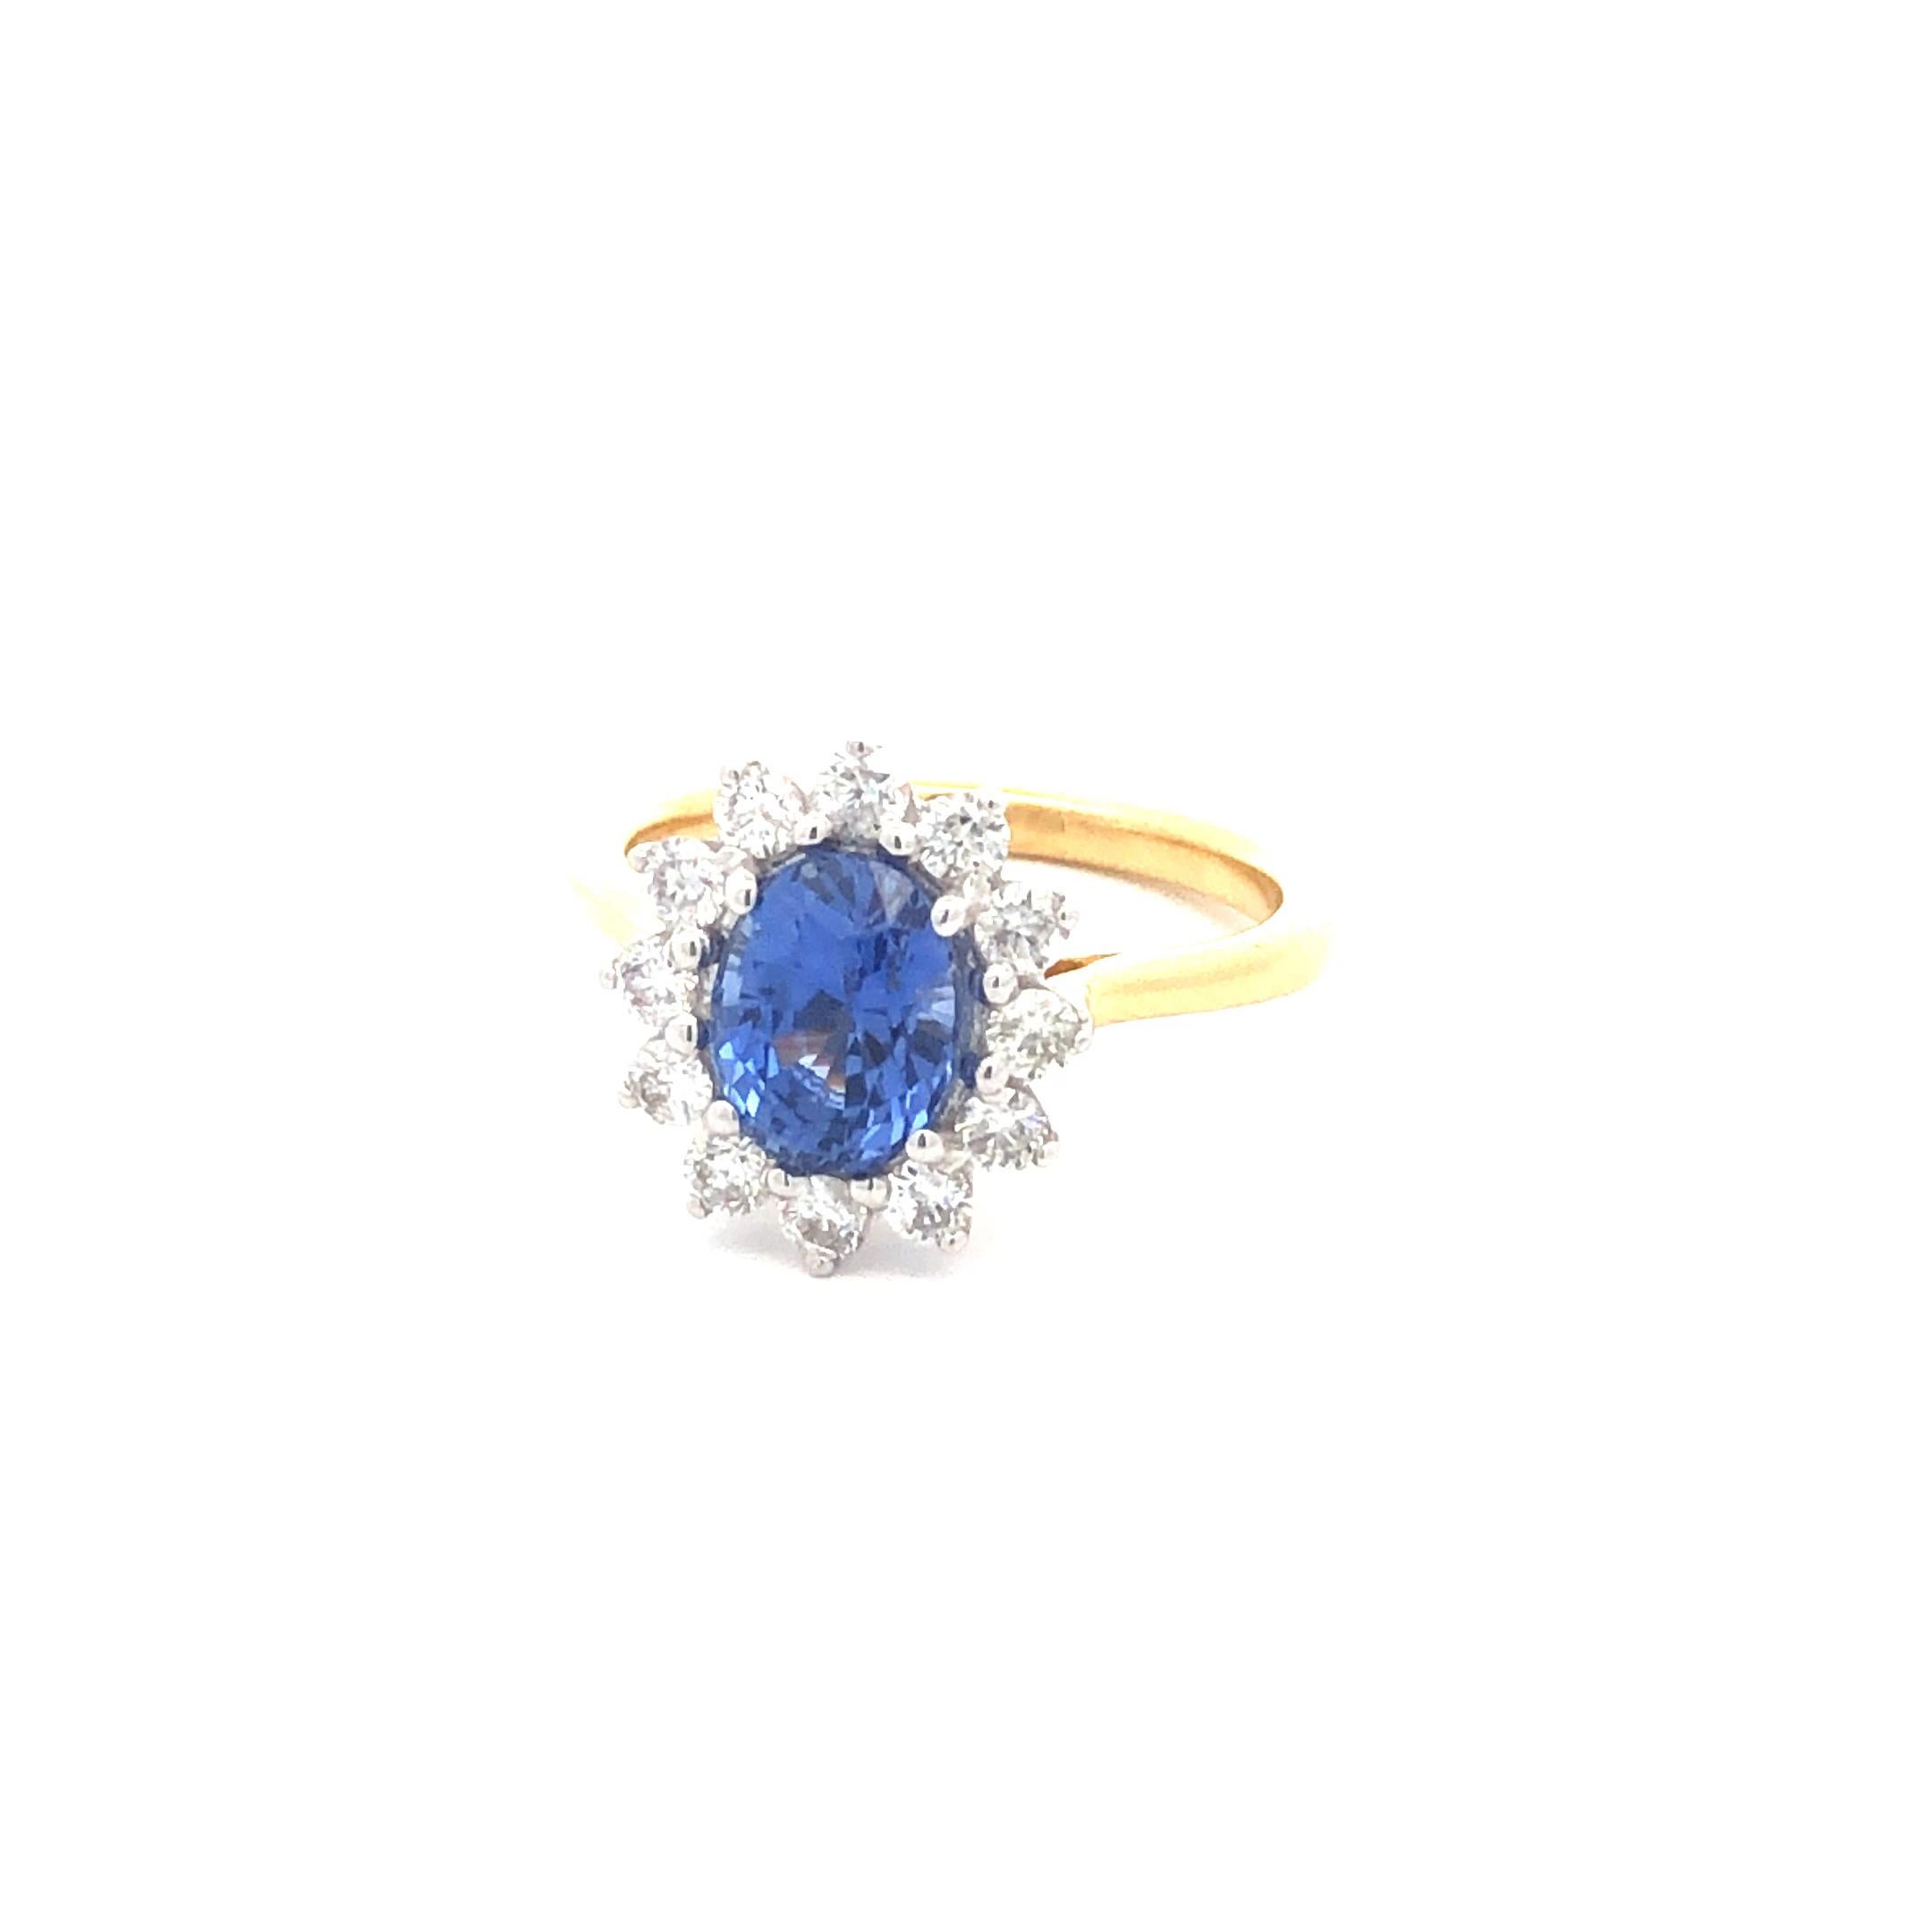 A bespoke bright and large 2.49 carat total gem weight, having a whopping 1.95 Carat Bright Blue Sapphire in a Dress / Engagement Ring surrounded by a claw set diamond halo With a total diamond weight of 0.54 carat diamonds white colour G, clarity